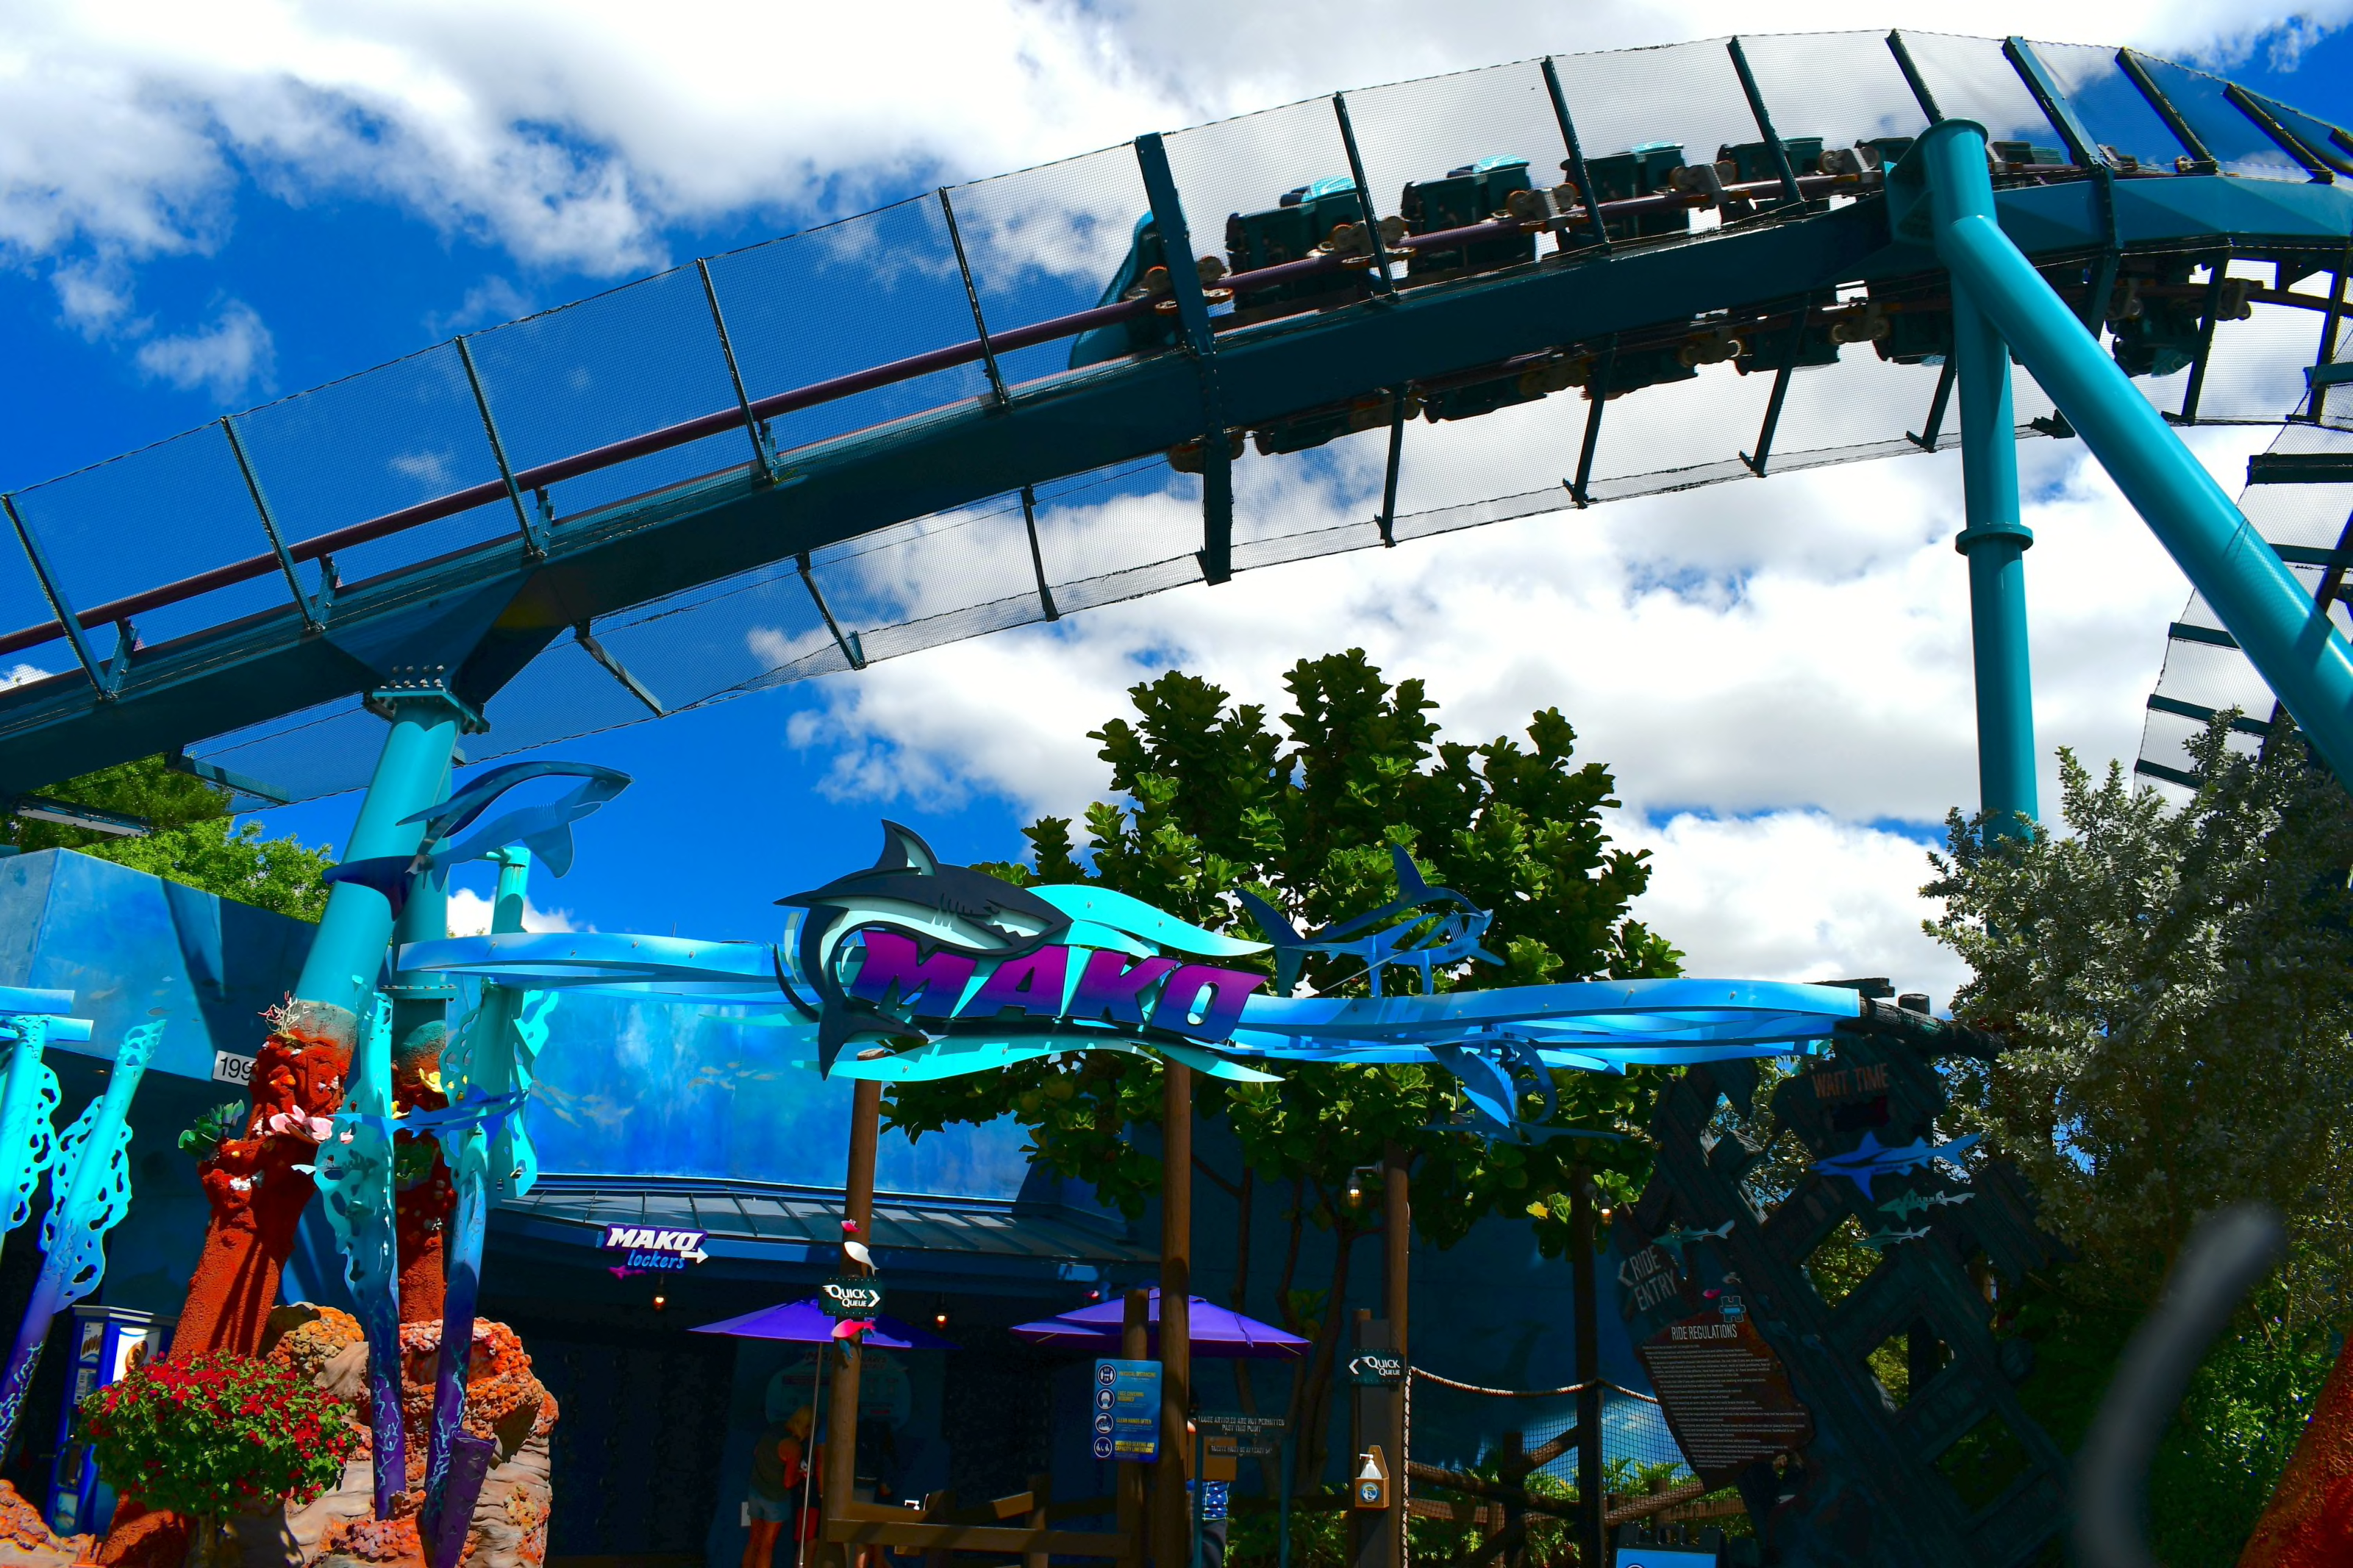 3 ROLLER COASTERS TO RIDE AT SEAWORLD - The Tim Tracker